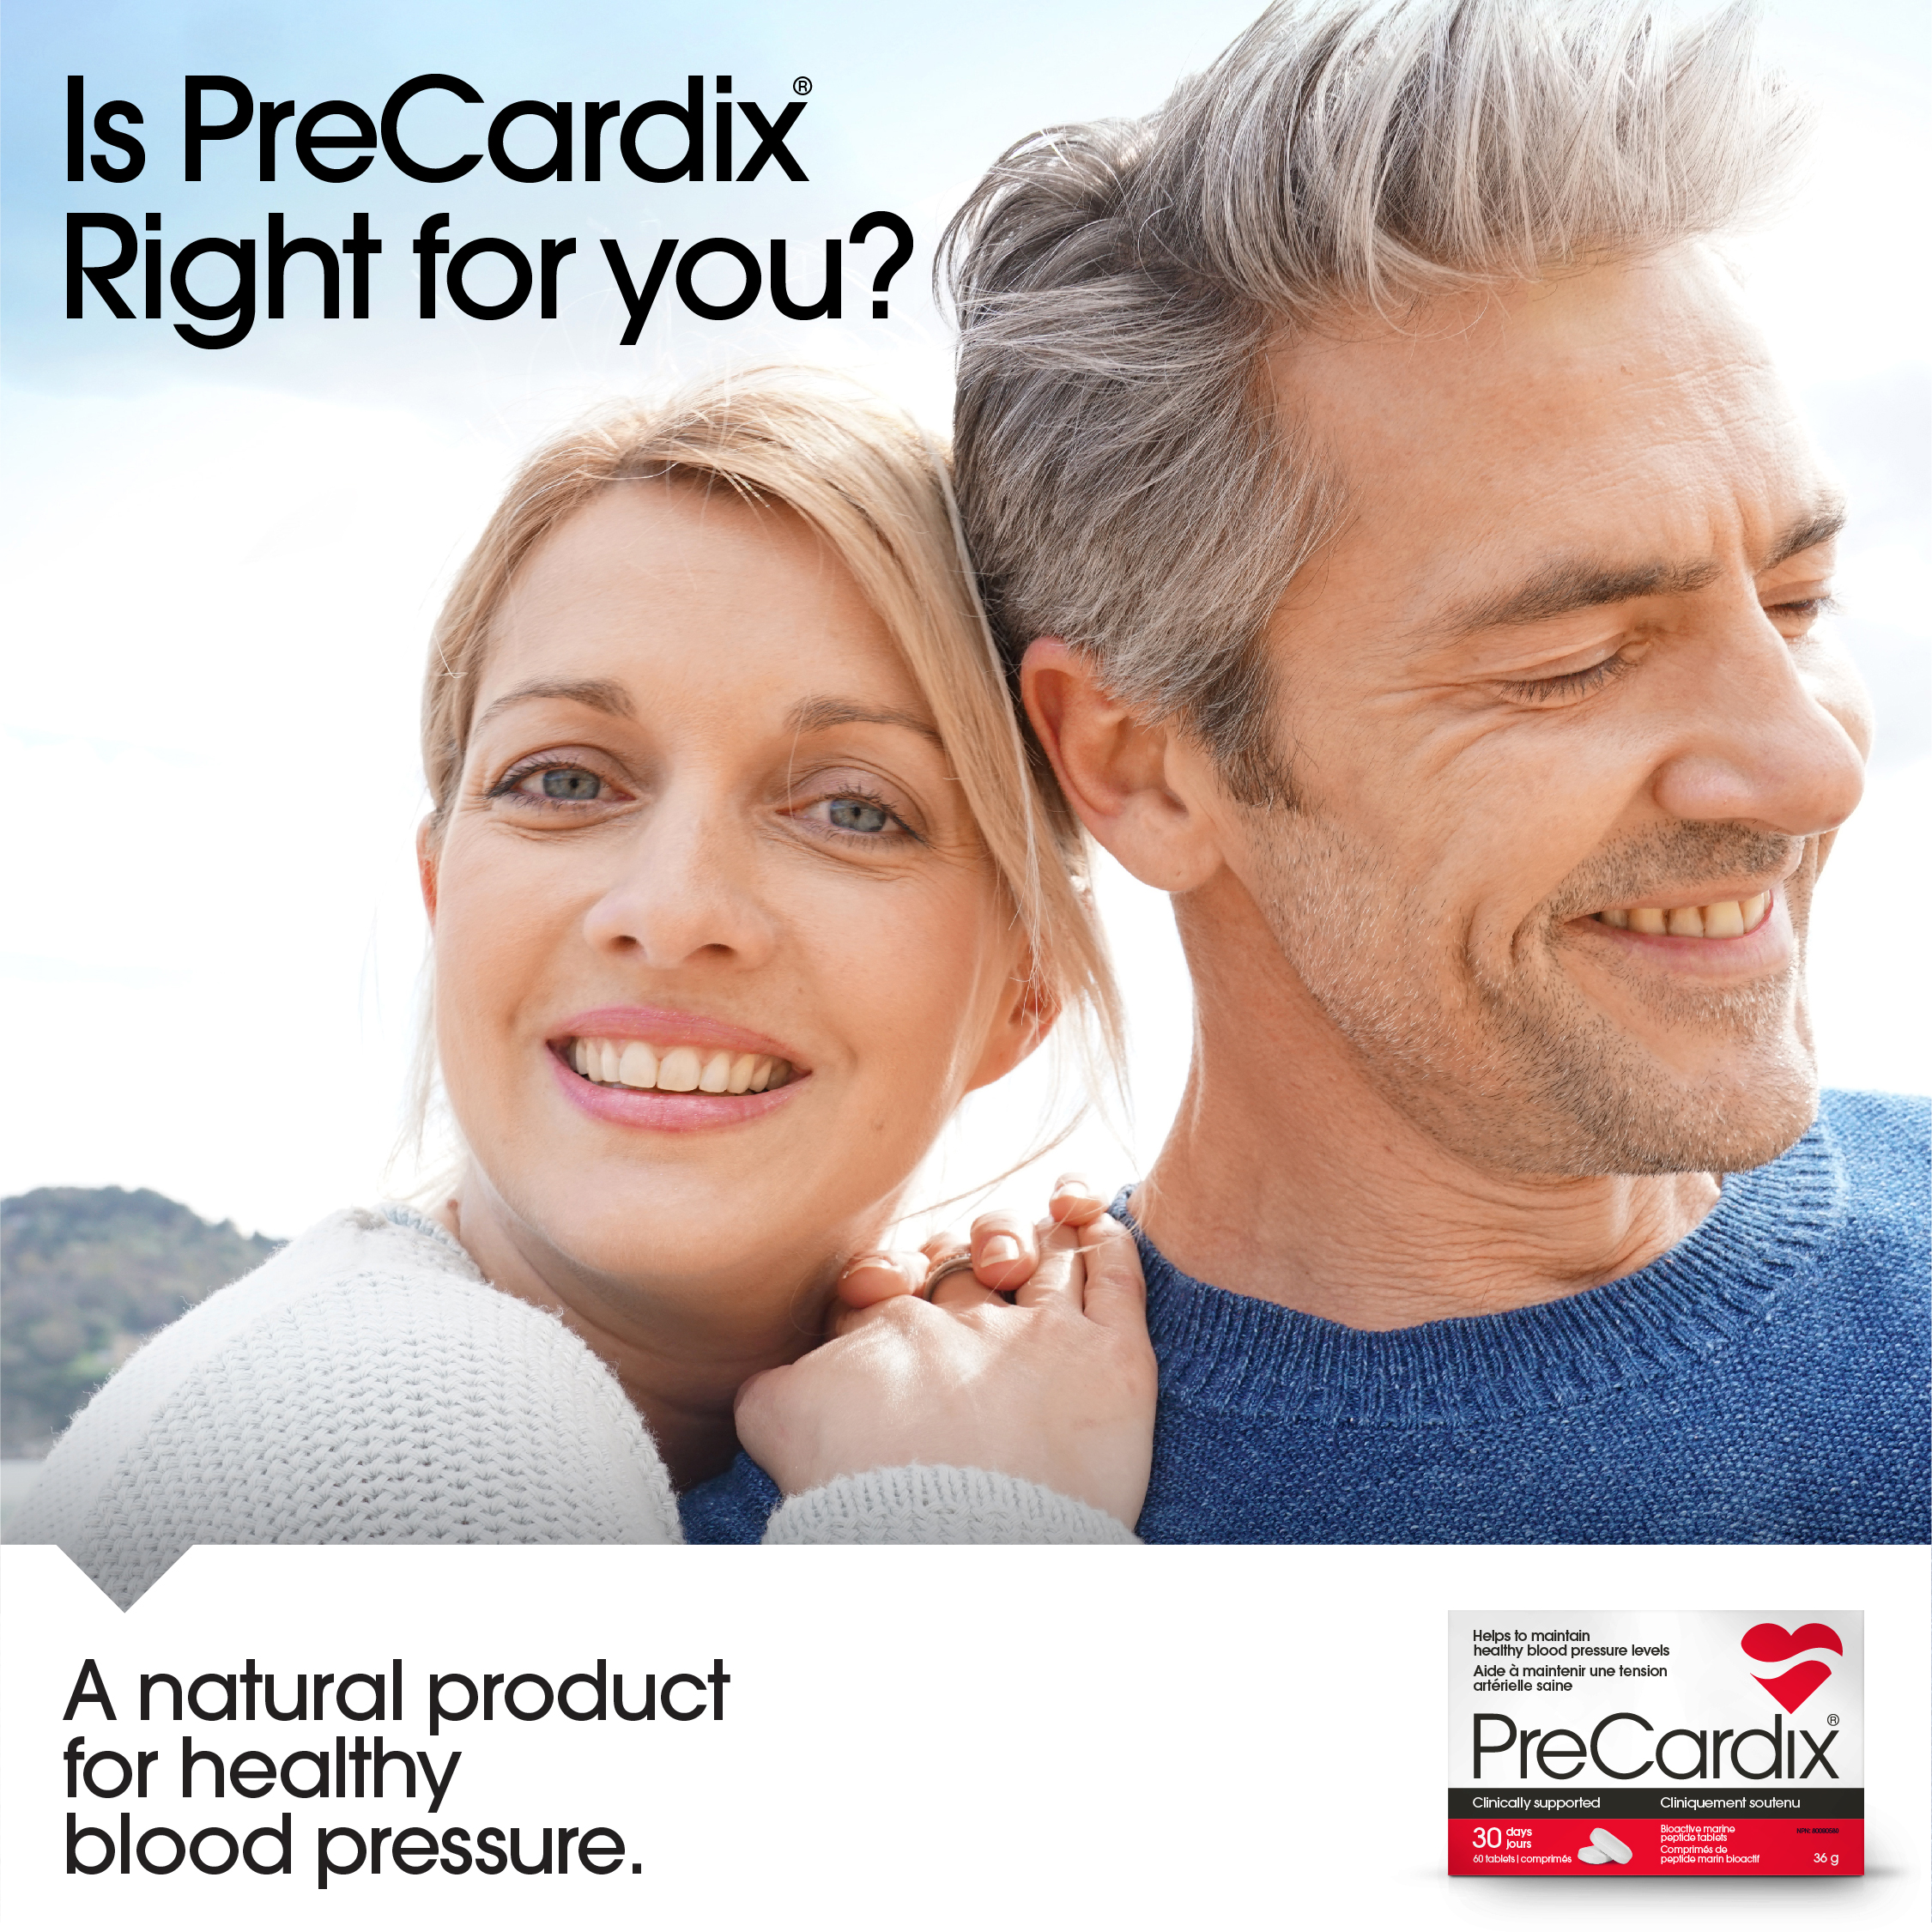 Is PreCardix right for you